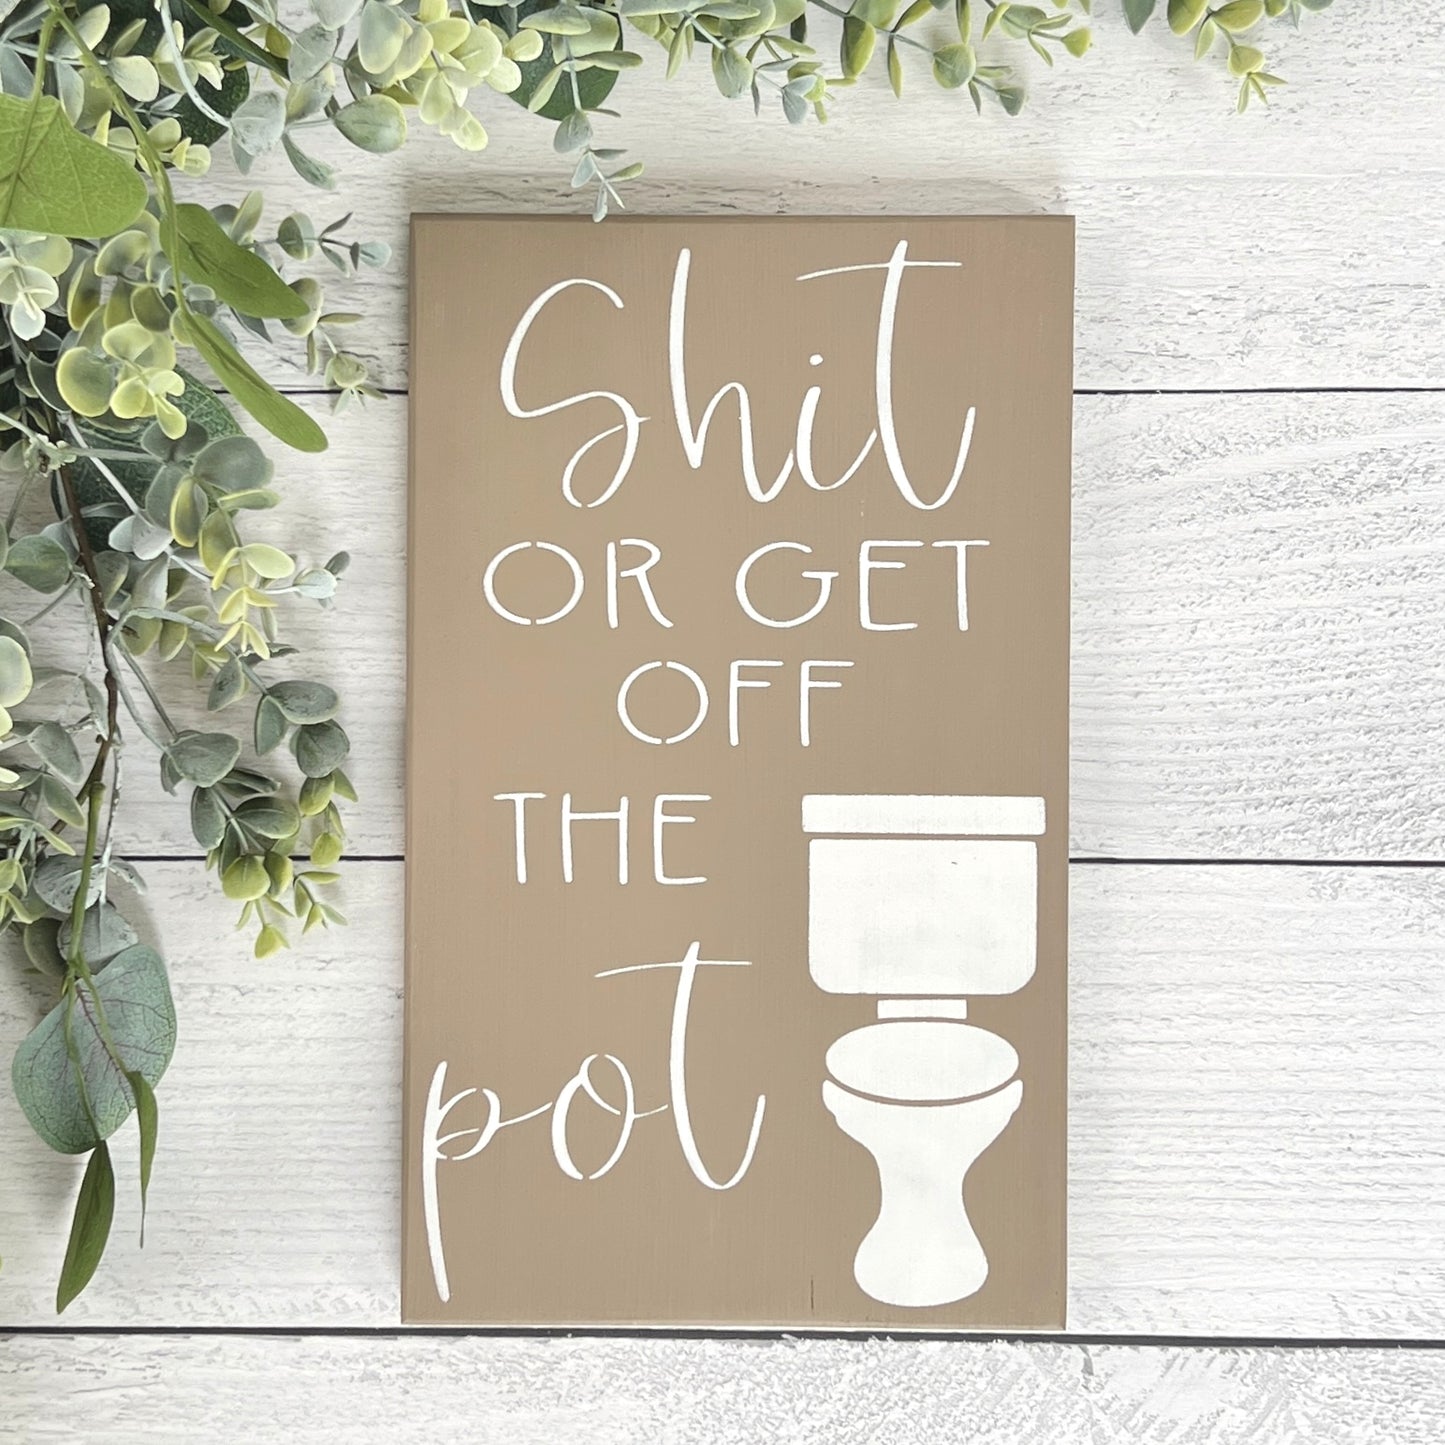 Shit or get off the pot wood sign - Bathroom Decor